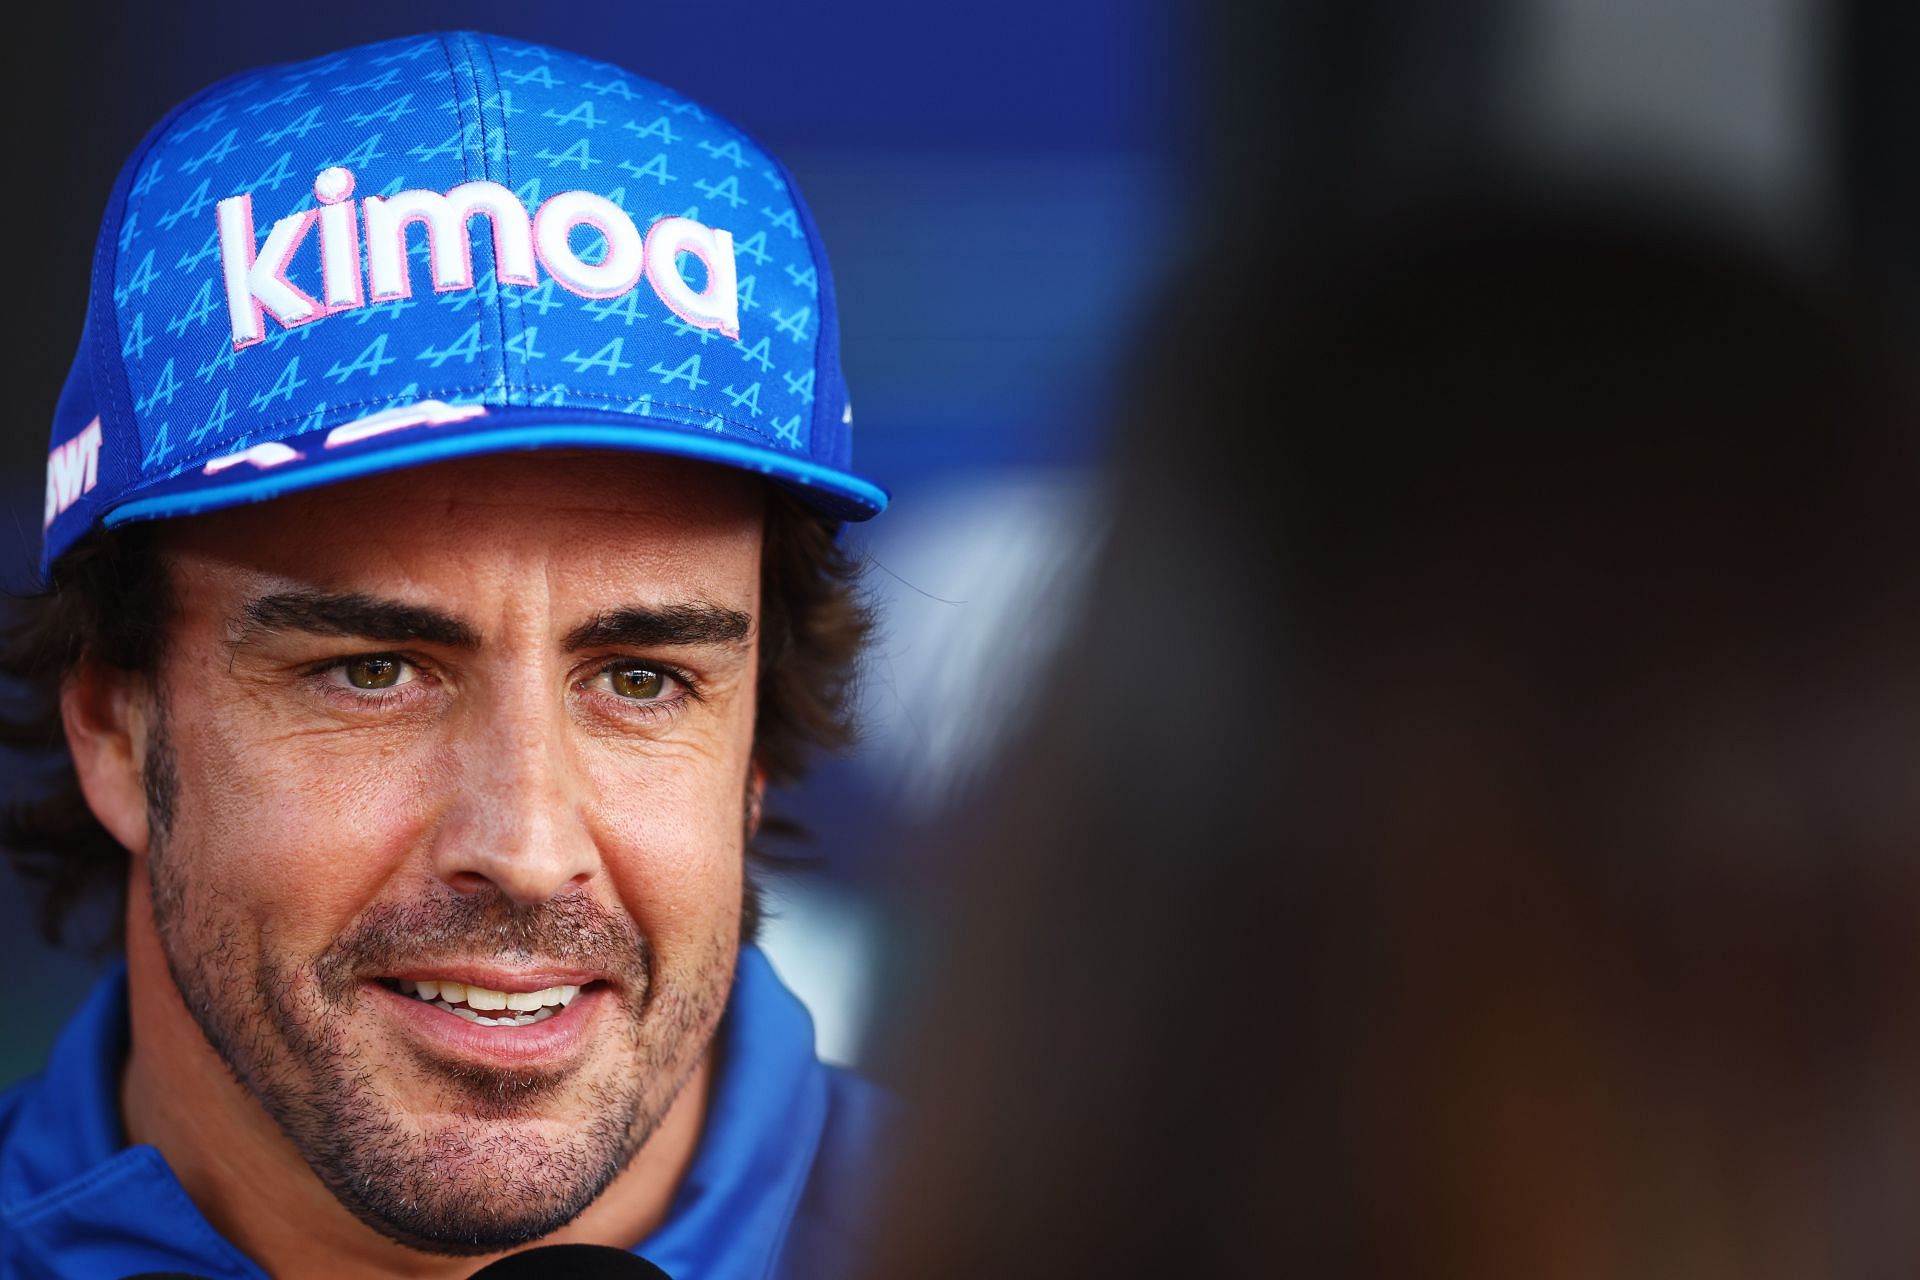 Fernando Alonso at the F1 Grand Prix of Hungary - Previews